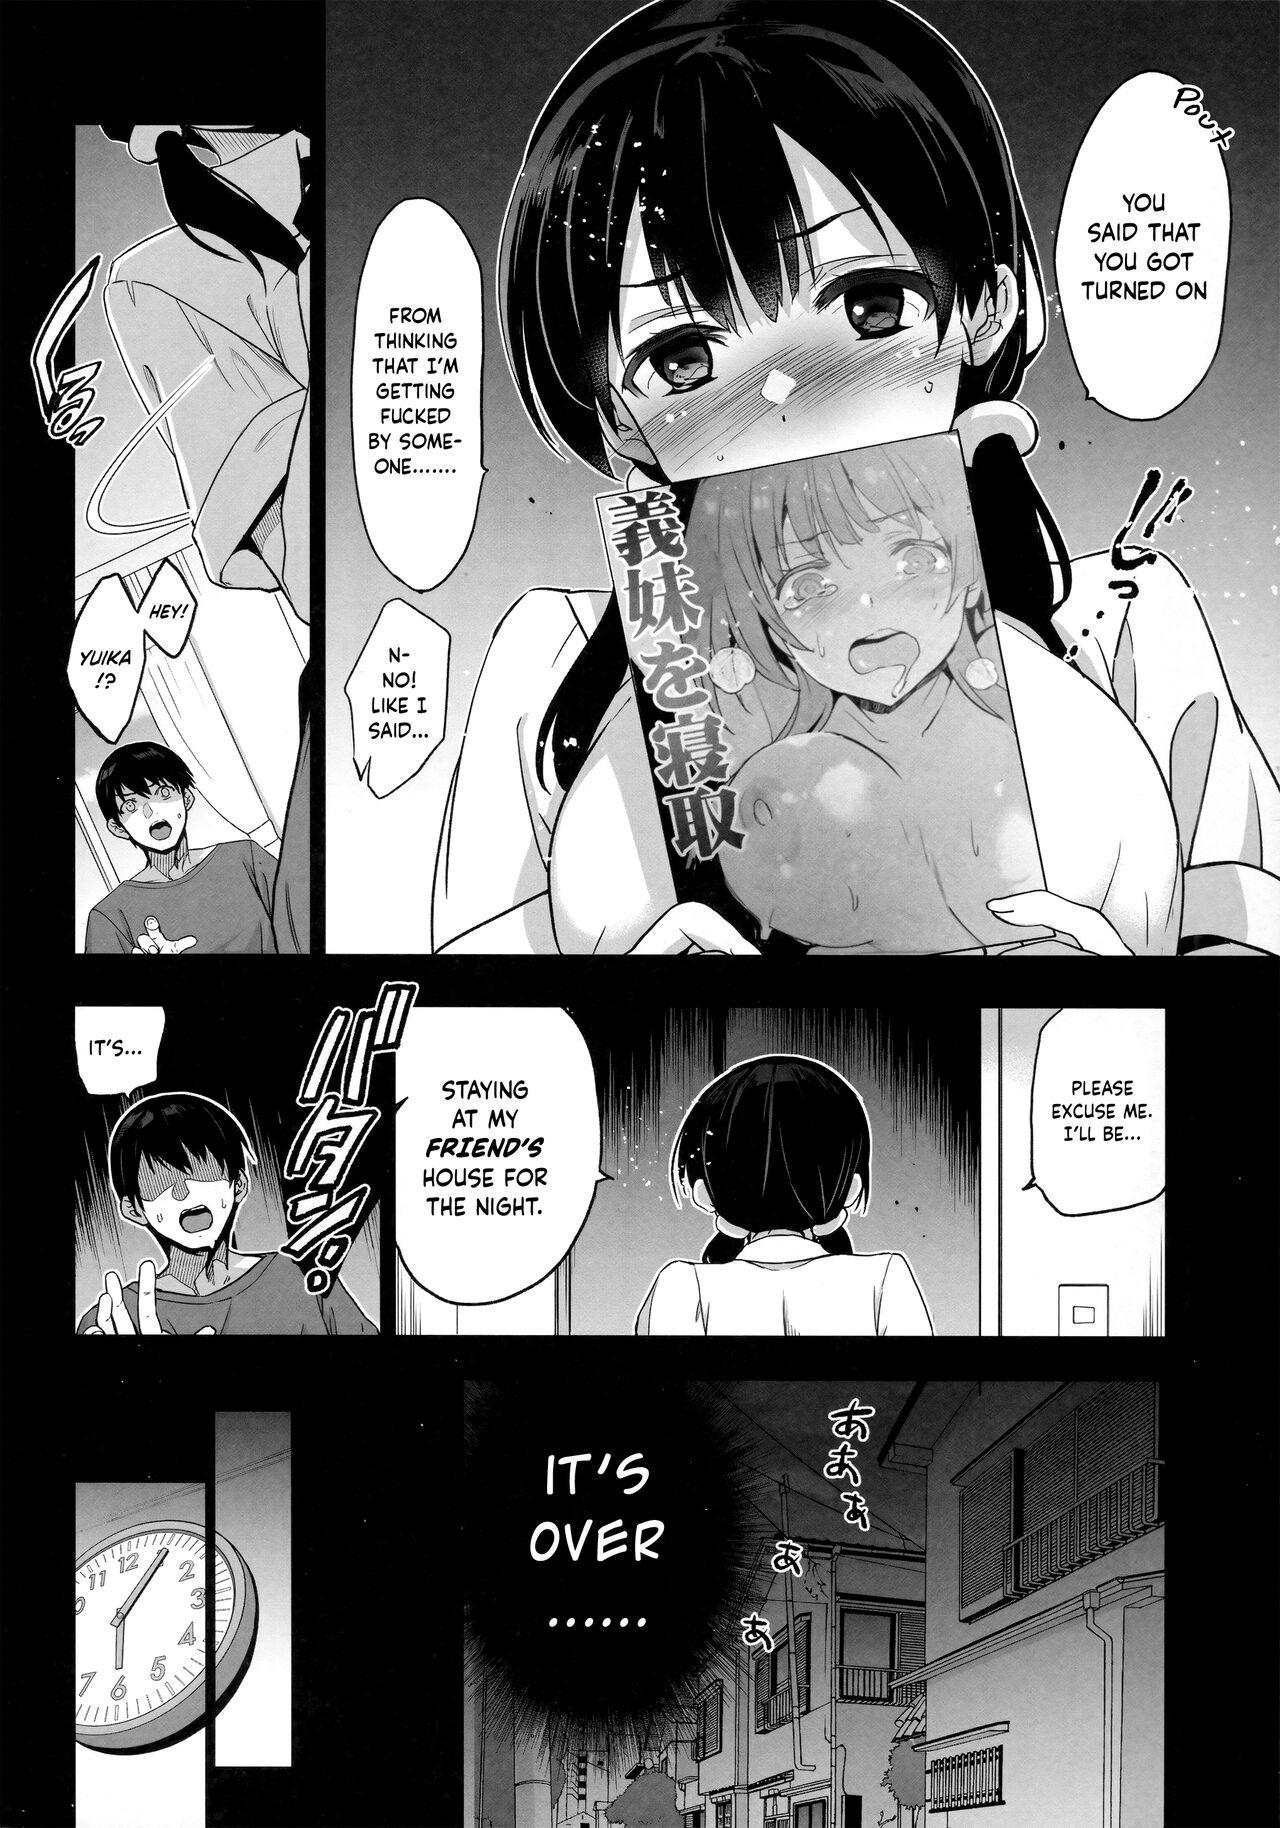 Clothed Imouto ga Boku ni Taninboux o Okutte kuru | My Little Sister Is Sending Me Her Videos Of Getting Fucked By Strangers - Original Sloppy Blow Job - Page 9